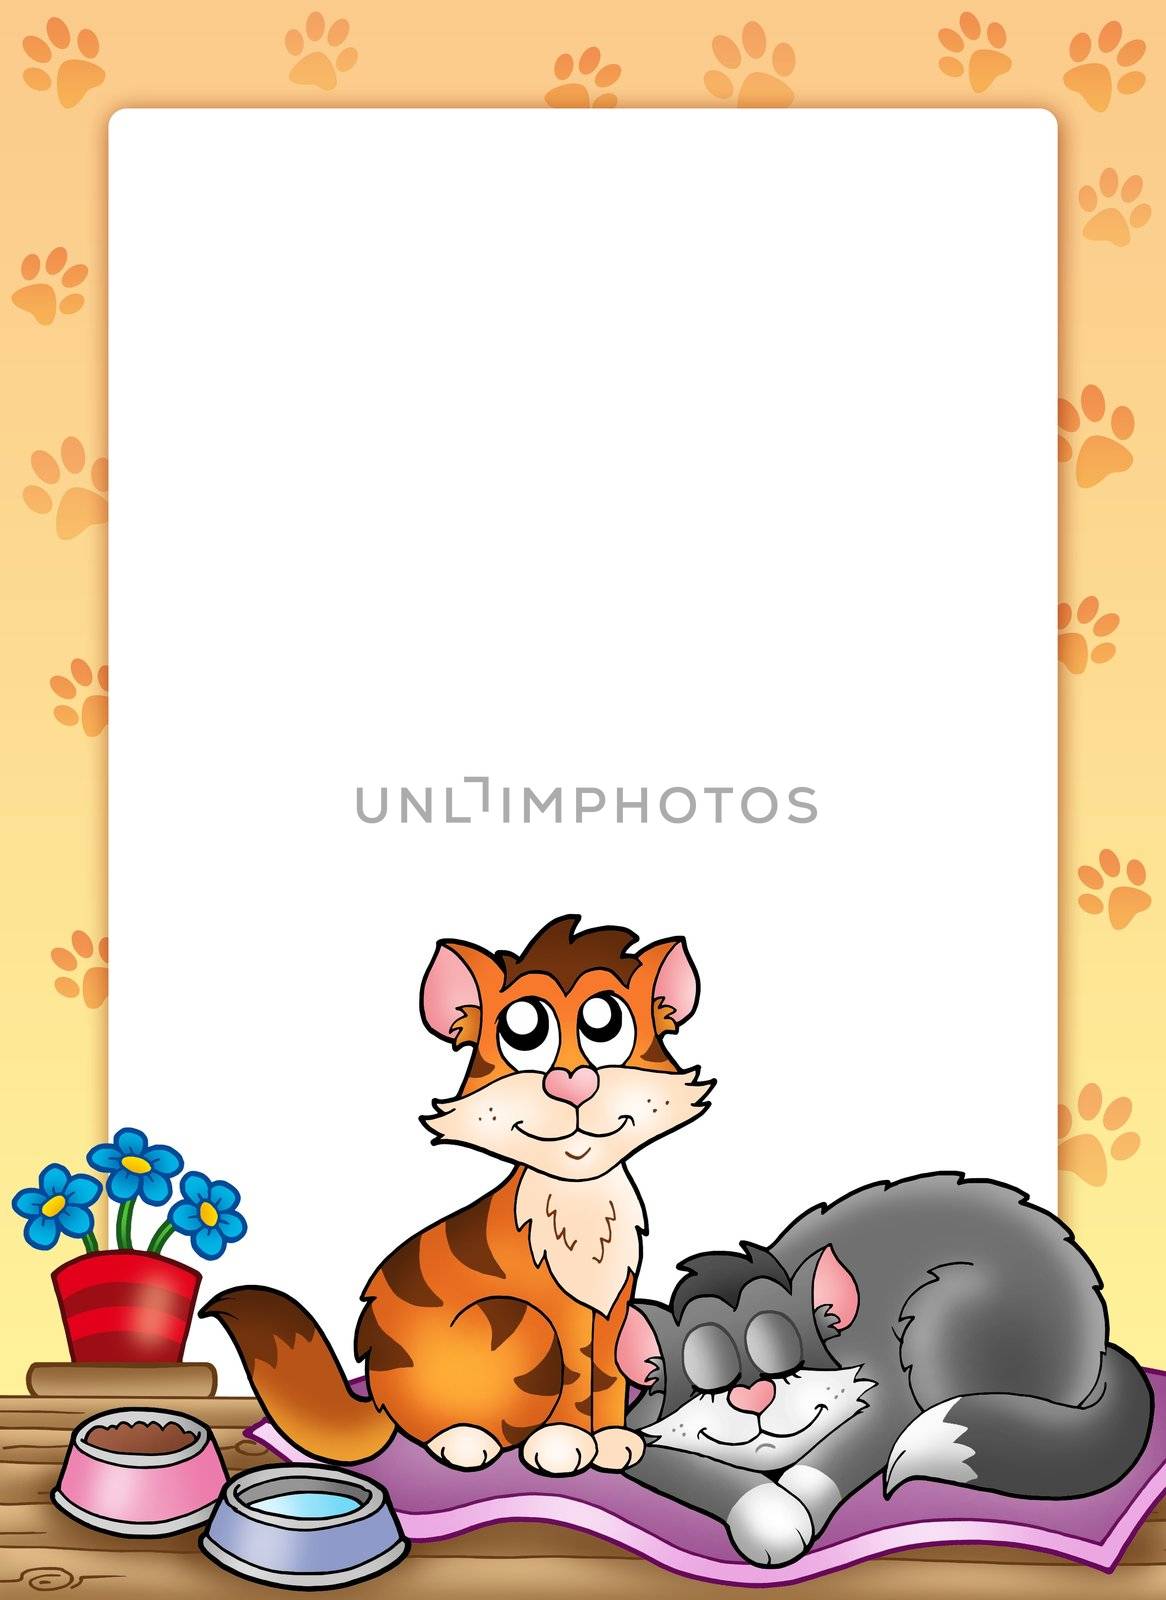 Frame with two cute cats - color illustration.